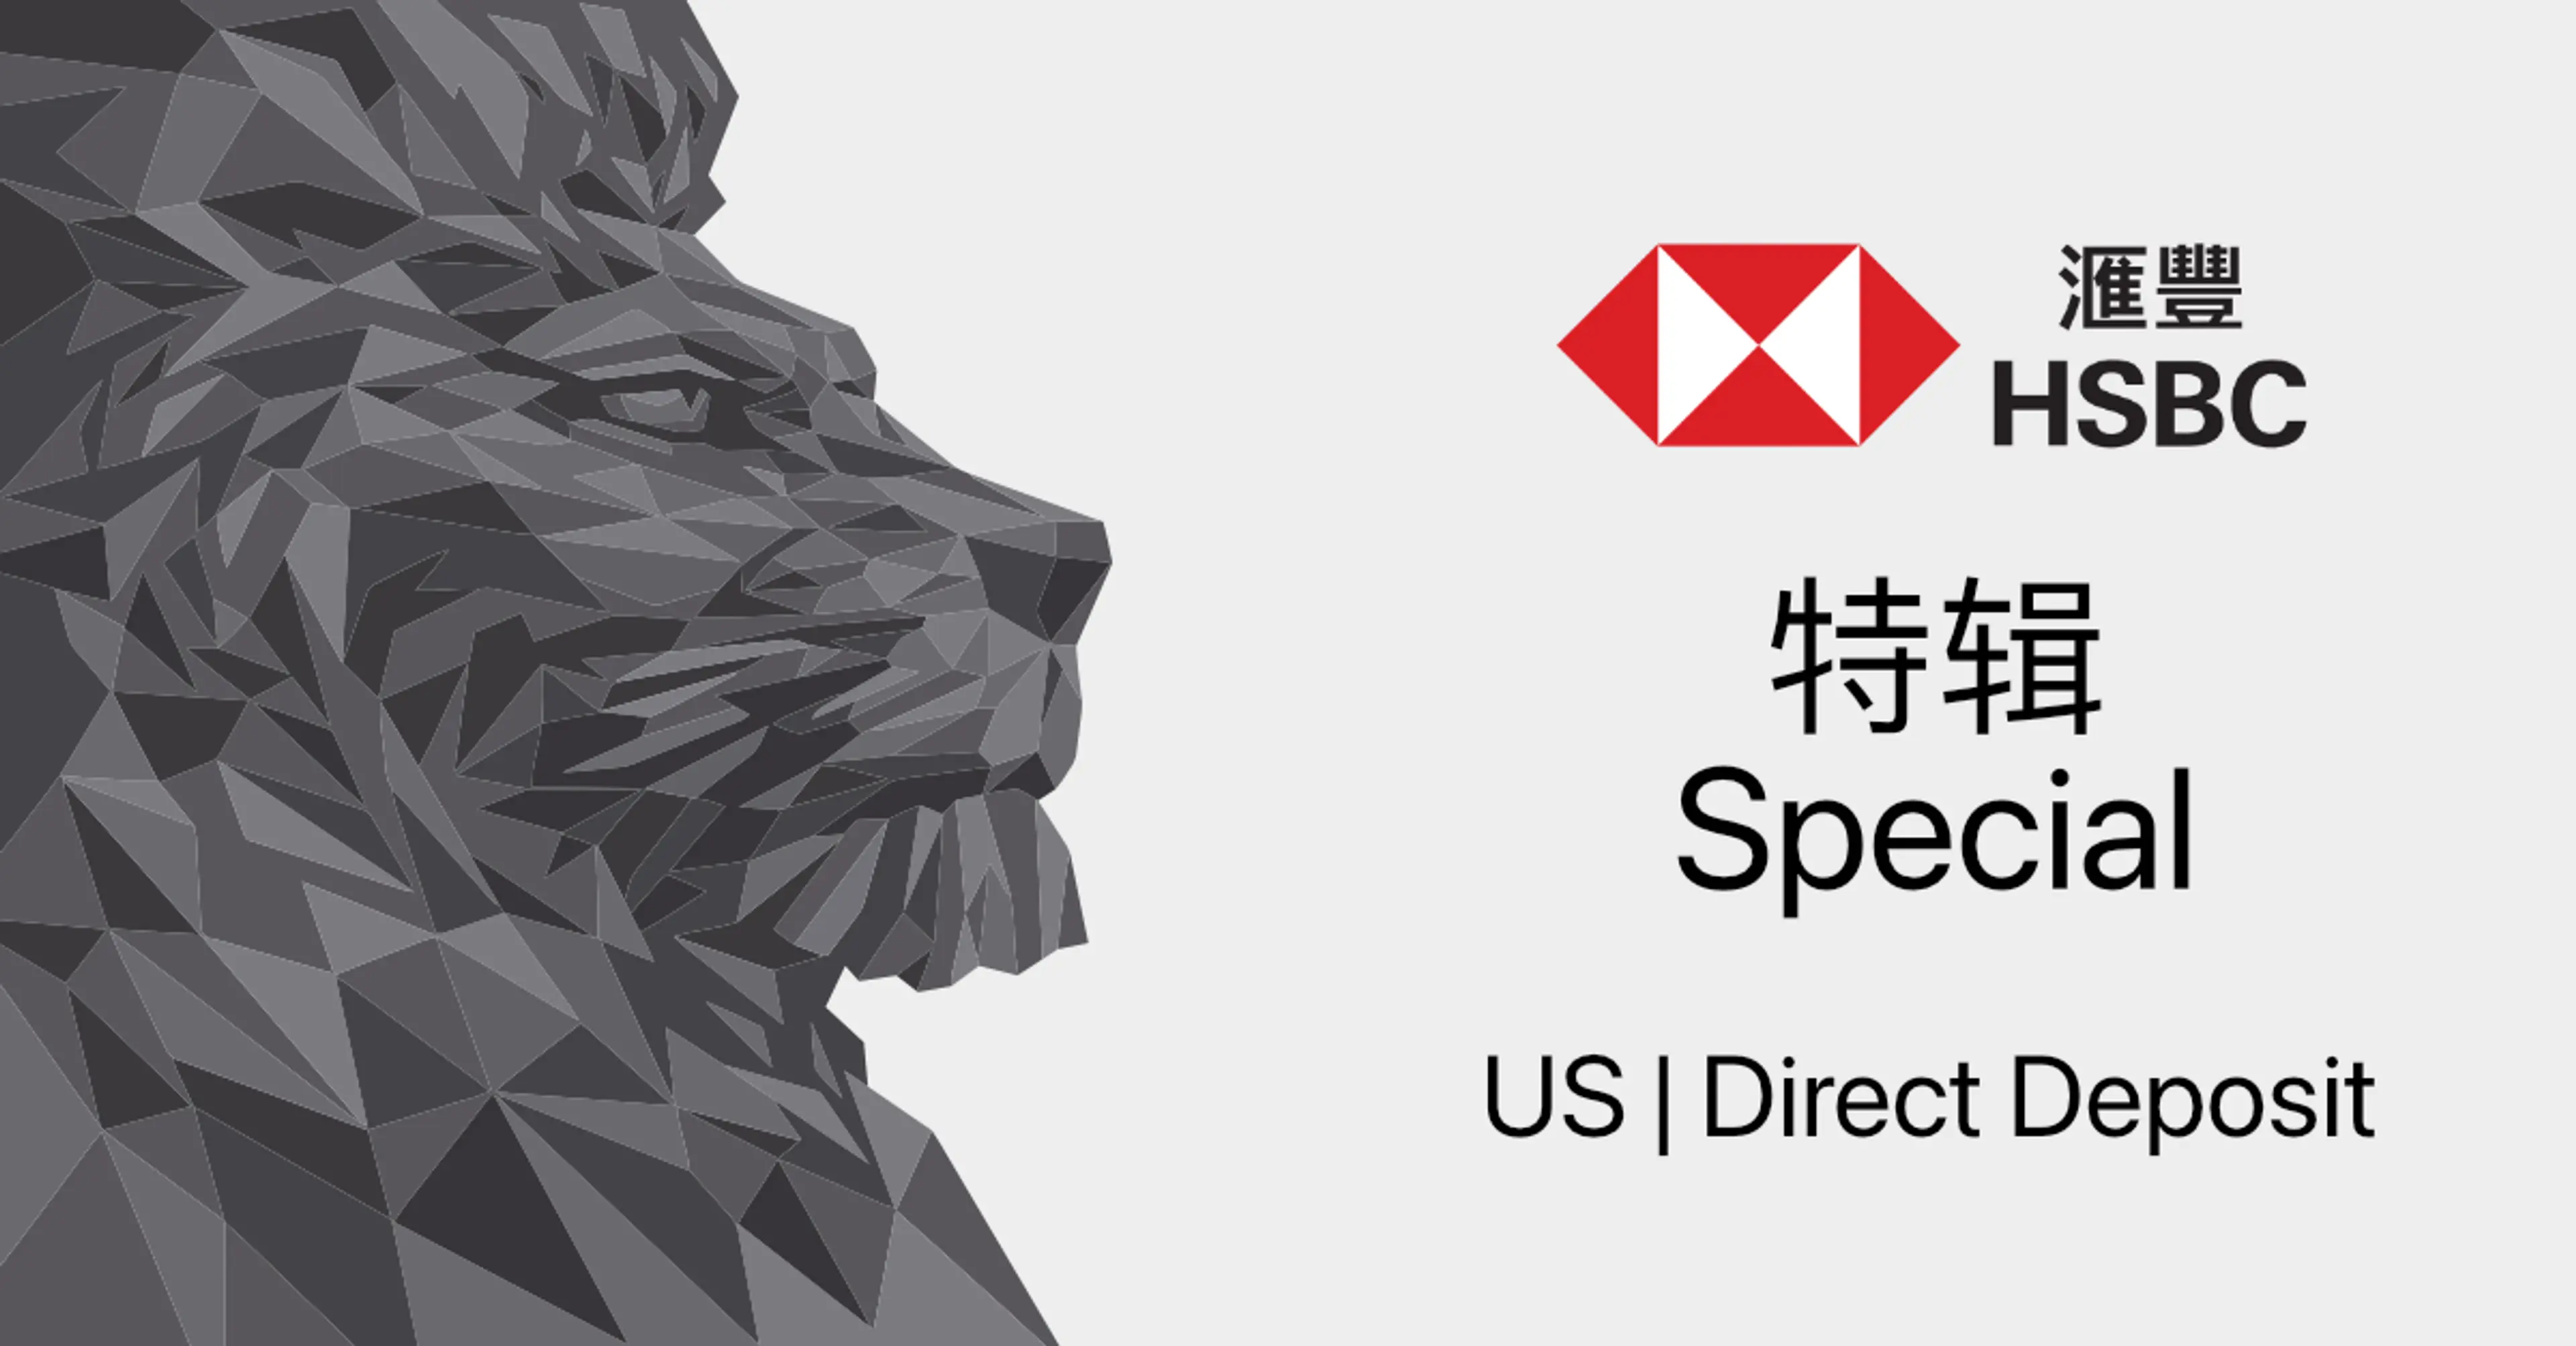 HSBC Special US DD.png